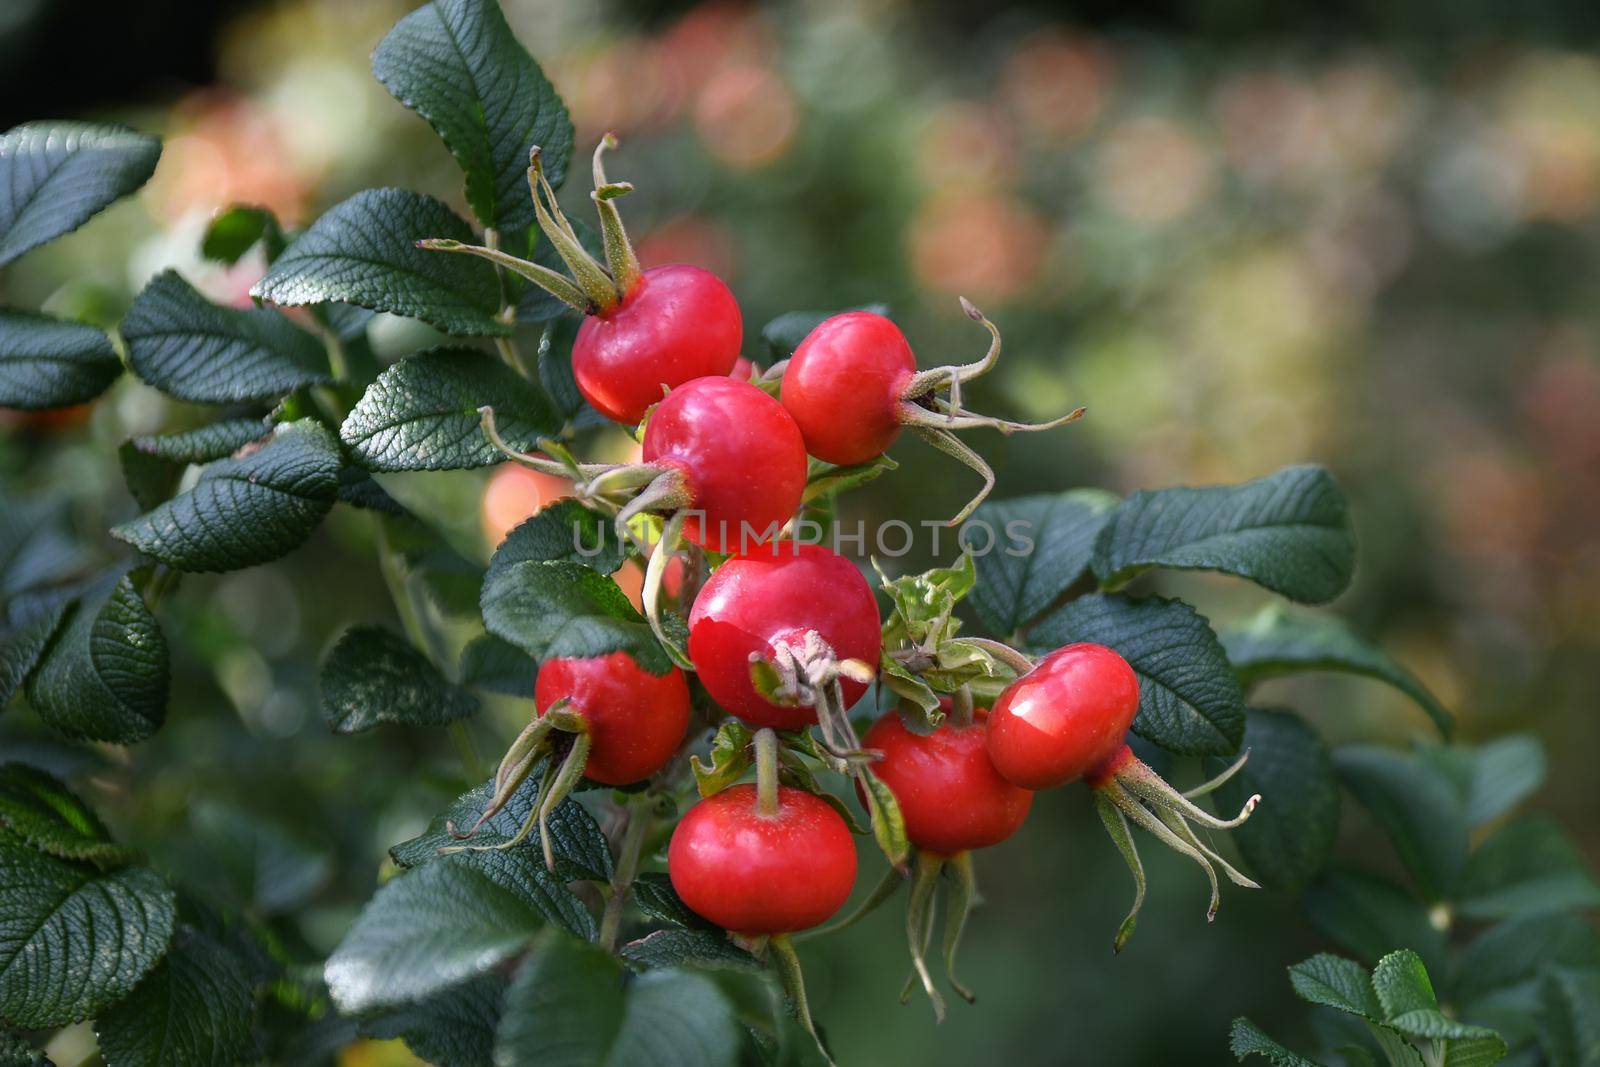 Red rose hips hanging on a branch at autumn by Godi